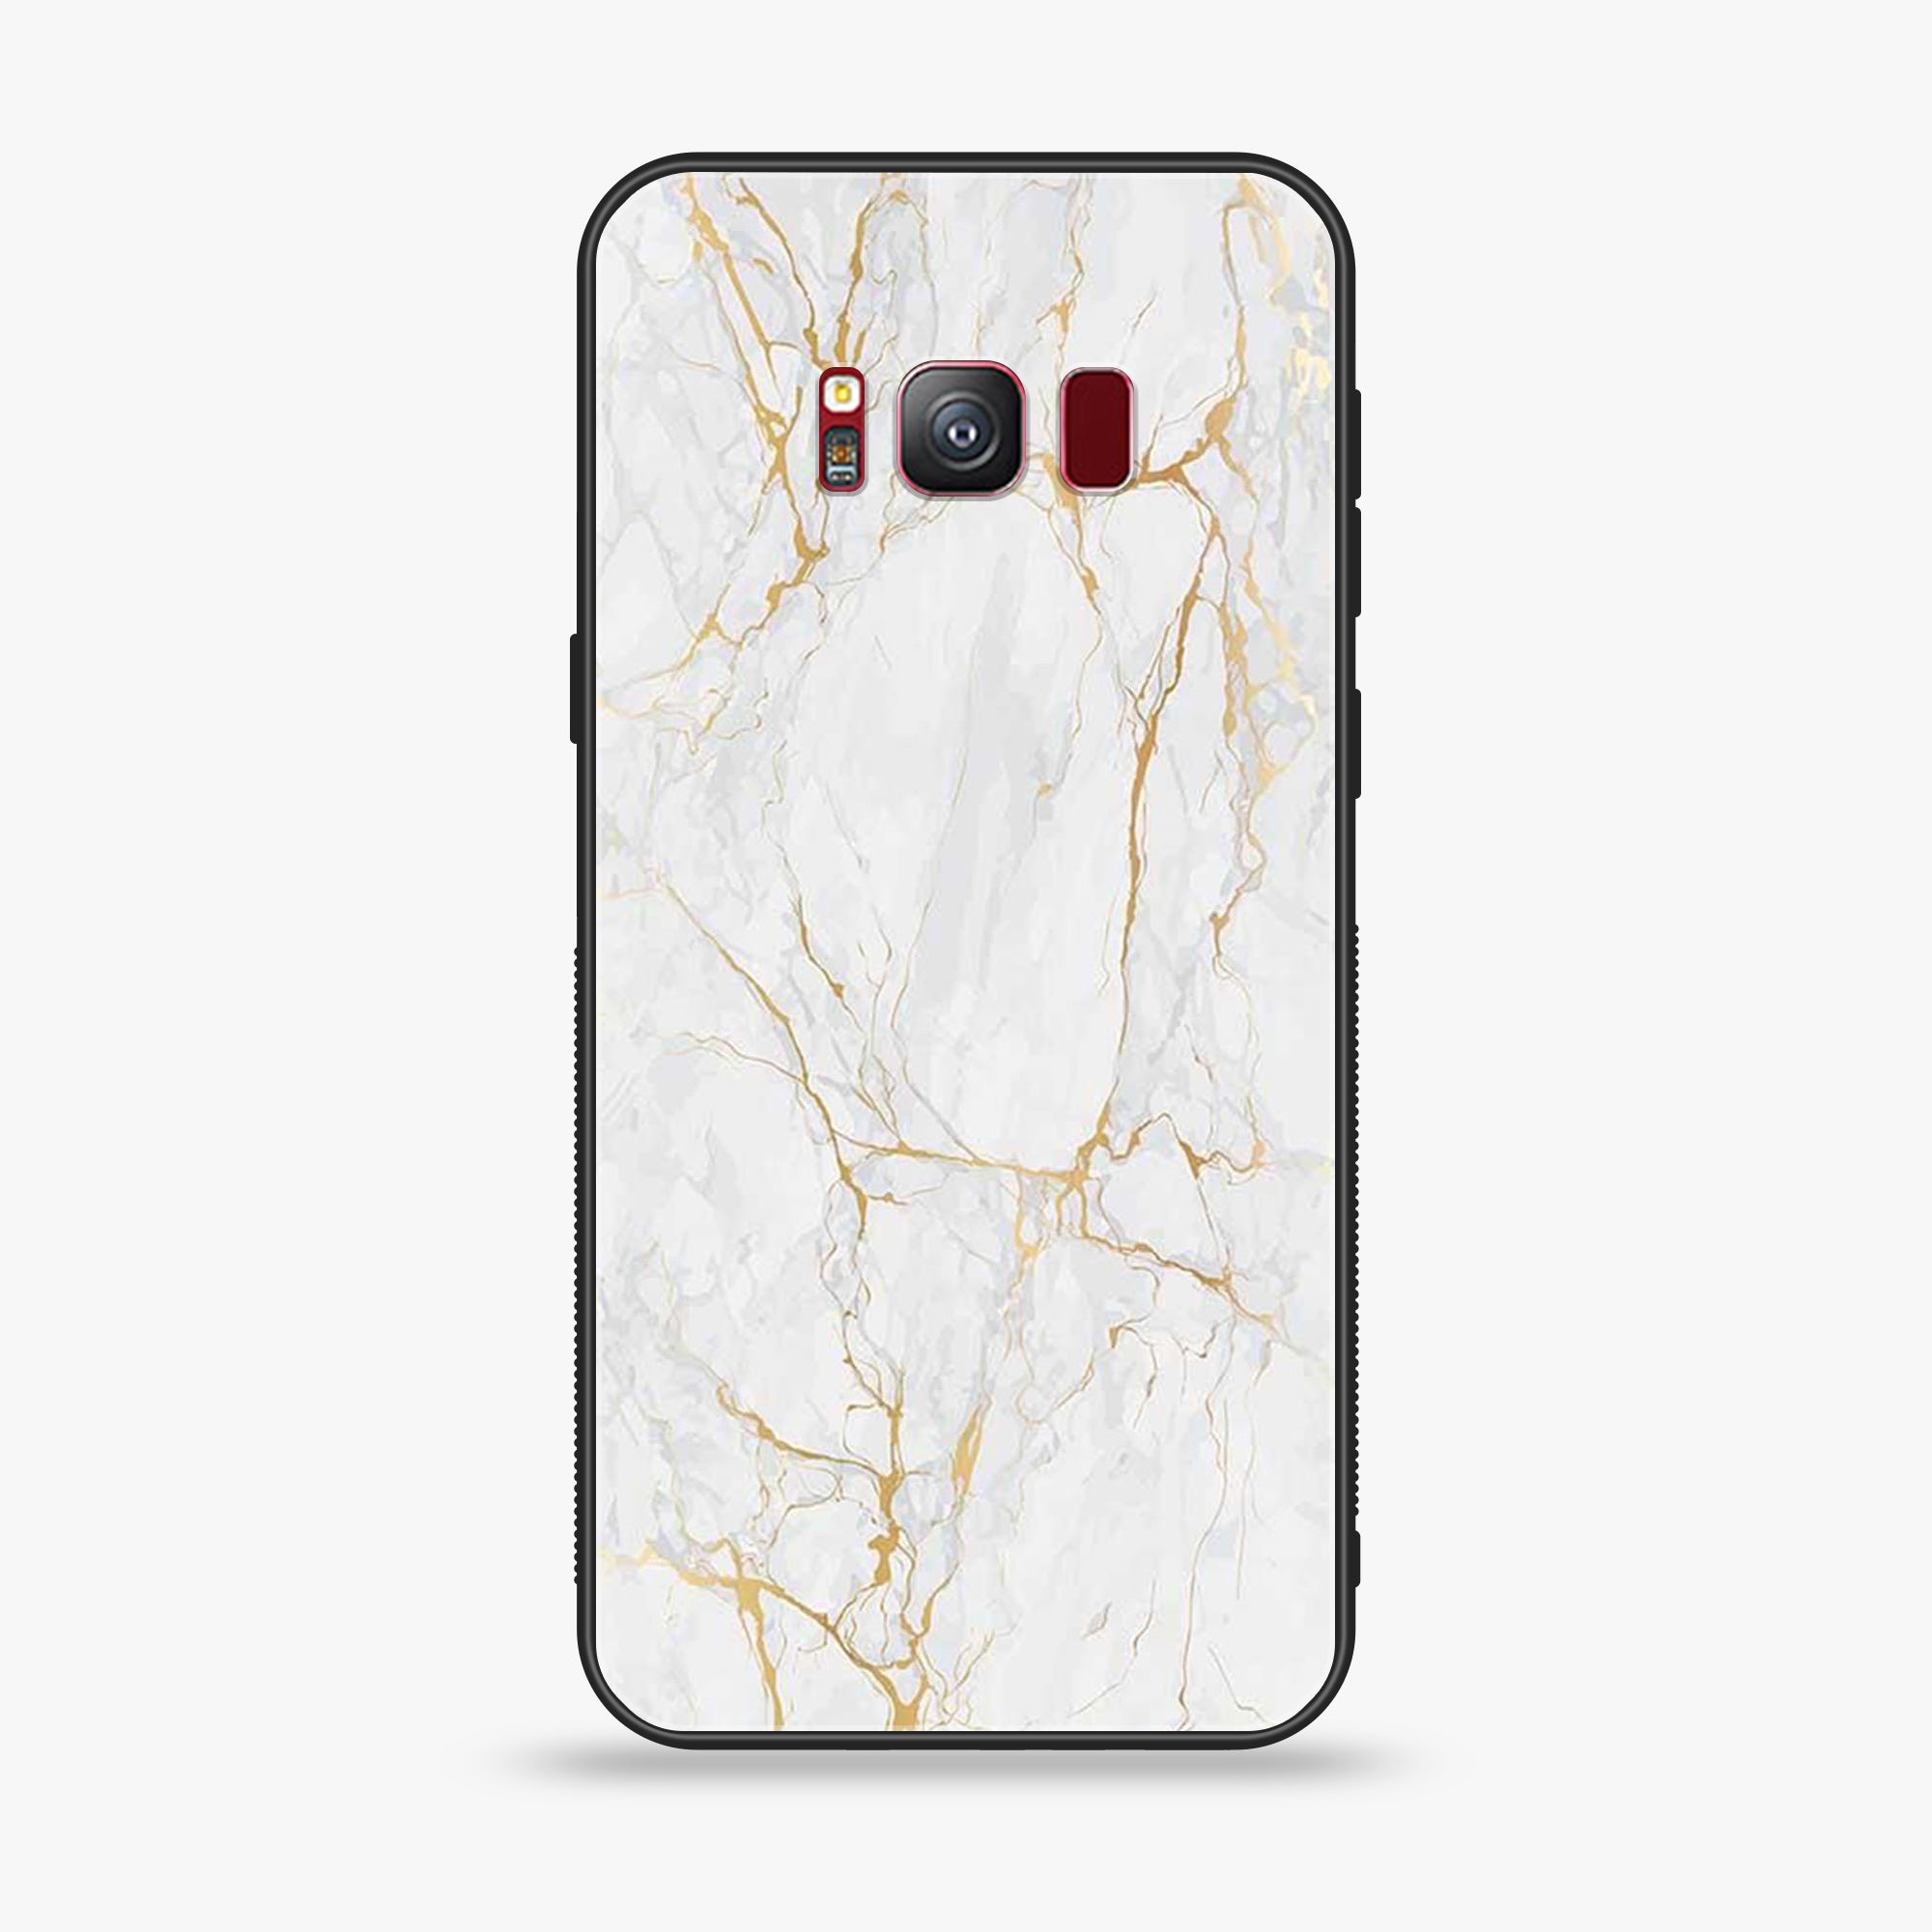 Galaxy S8 - White Marble Series - Premium Printed Glass soft Bumper shock Proof Case